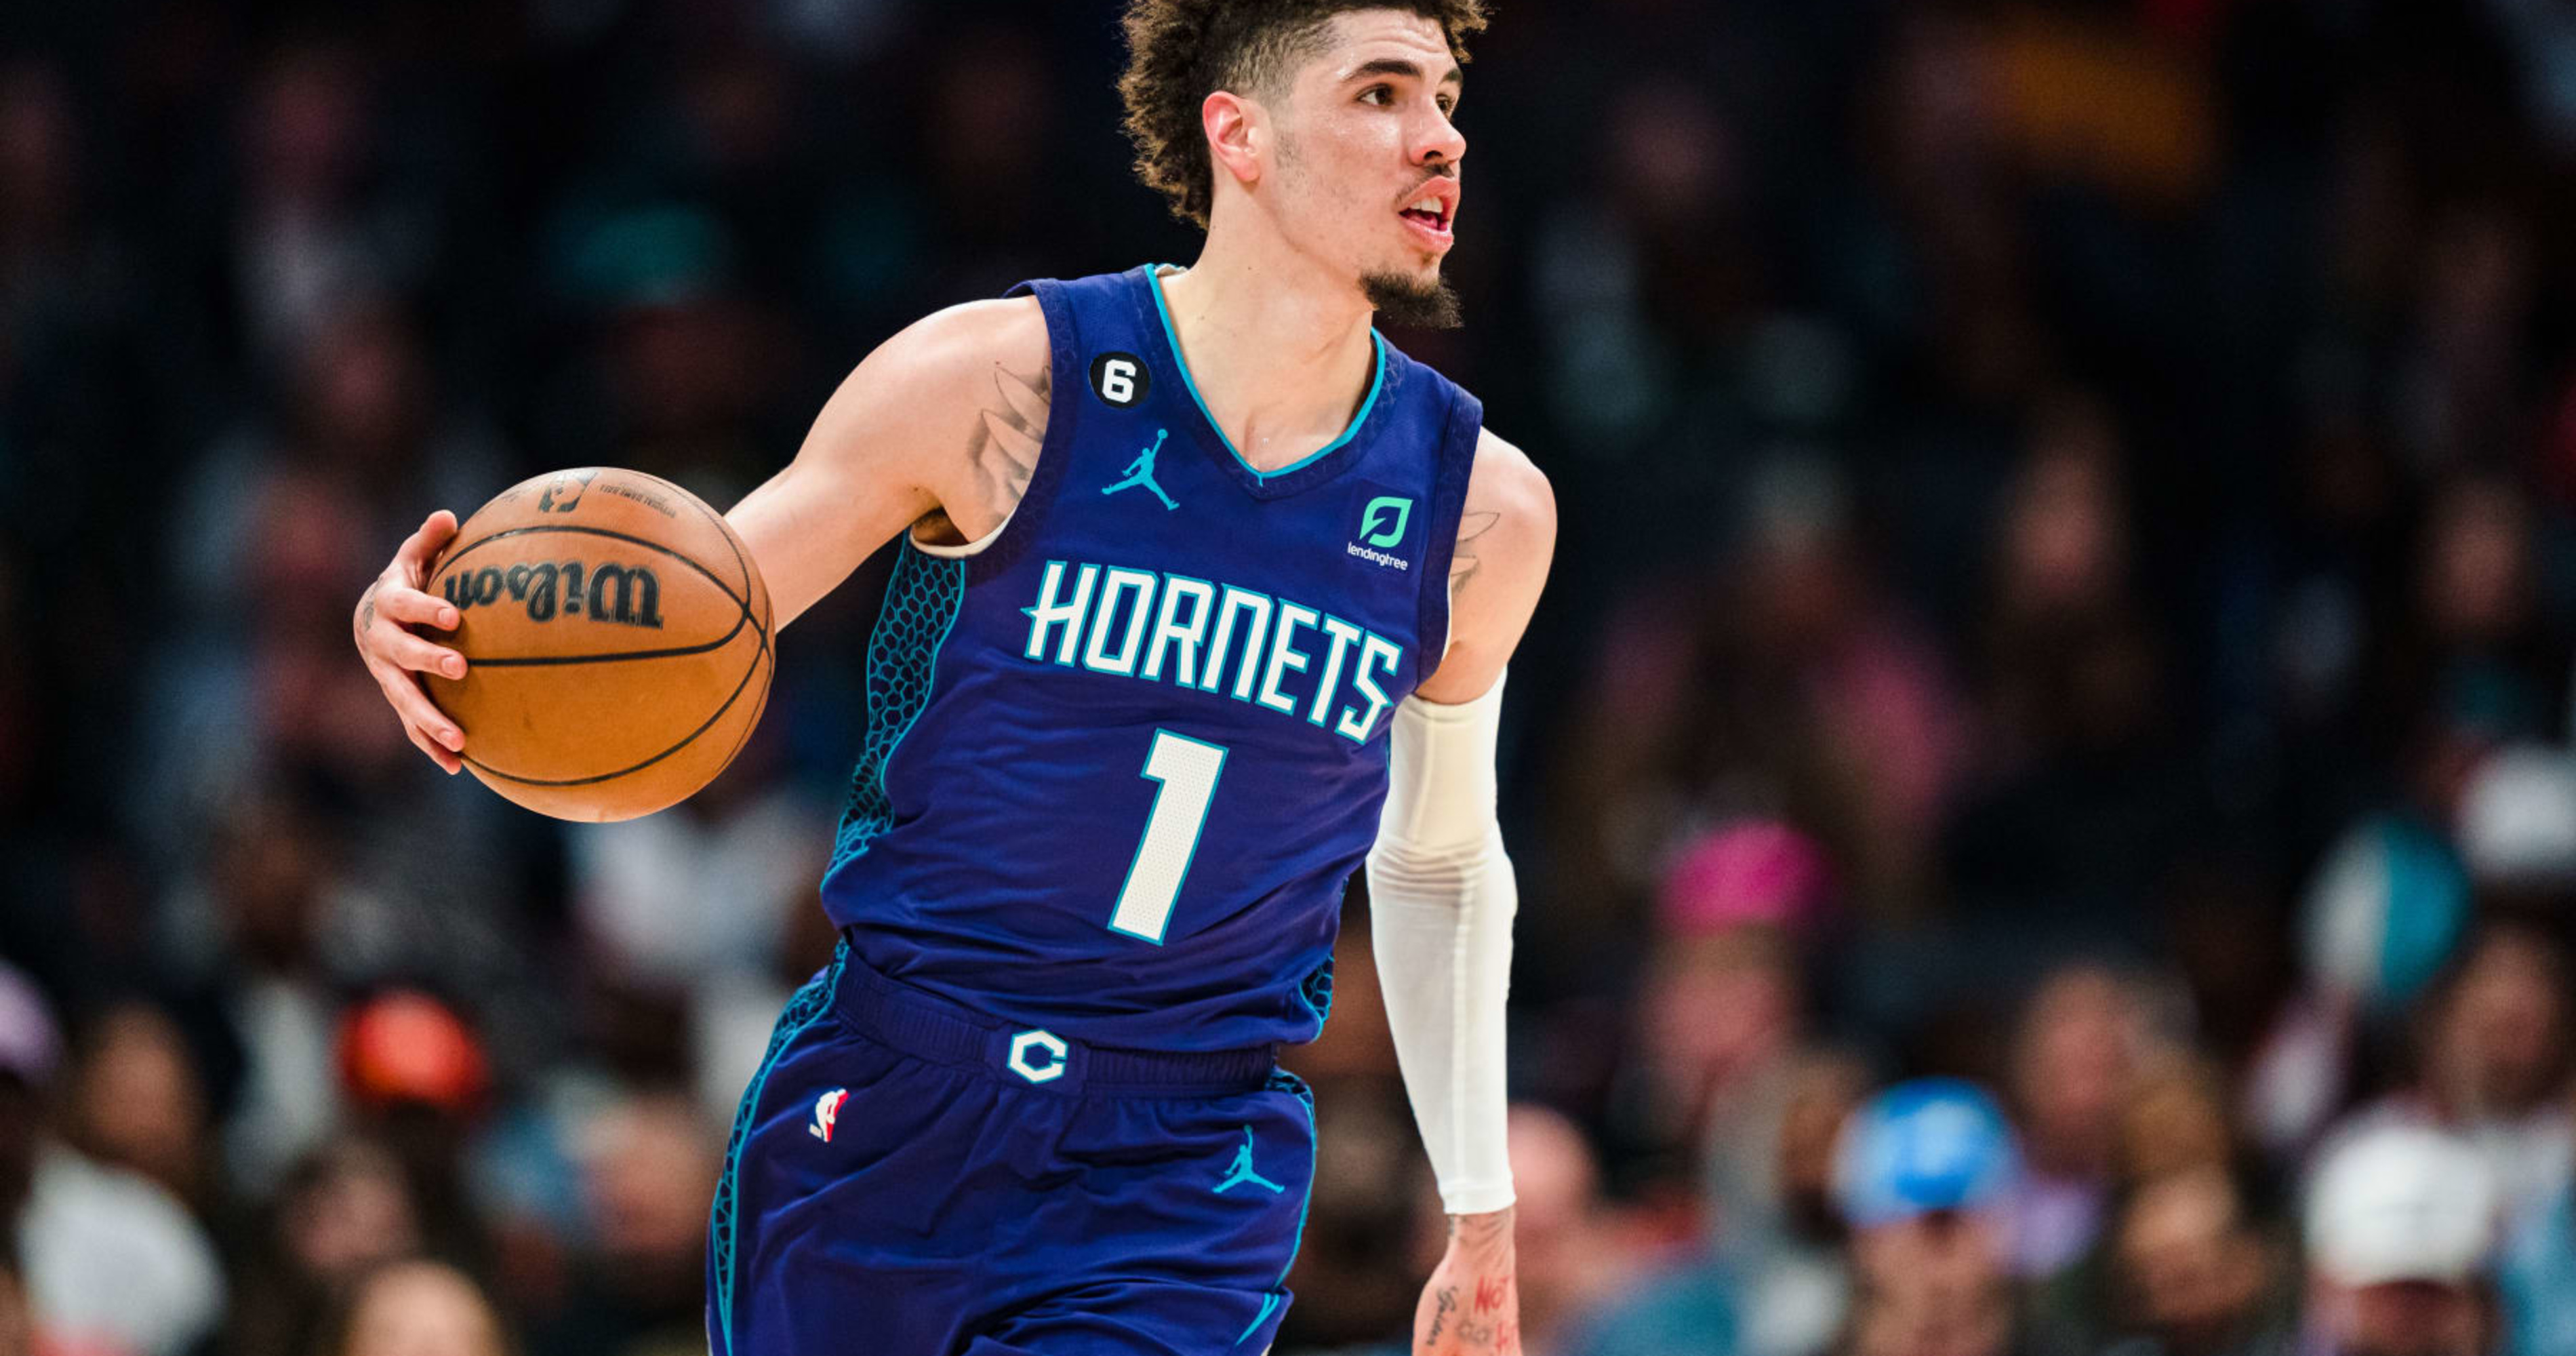 Charlotte Hornets media day: LaMelo Ball ankle injury update